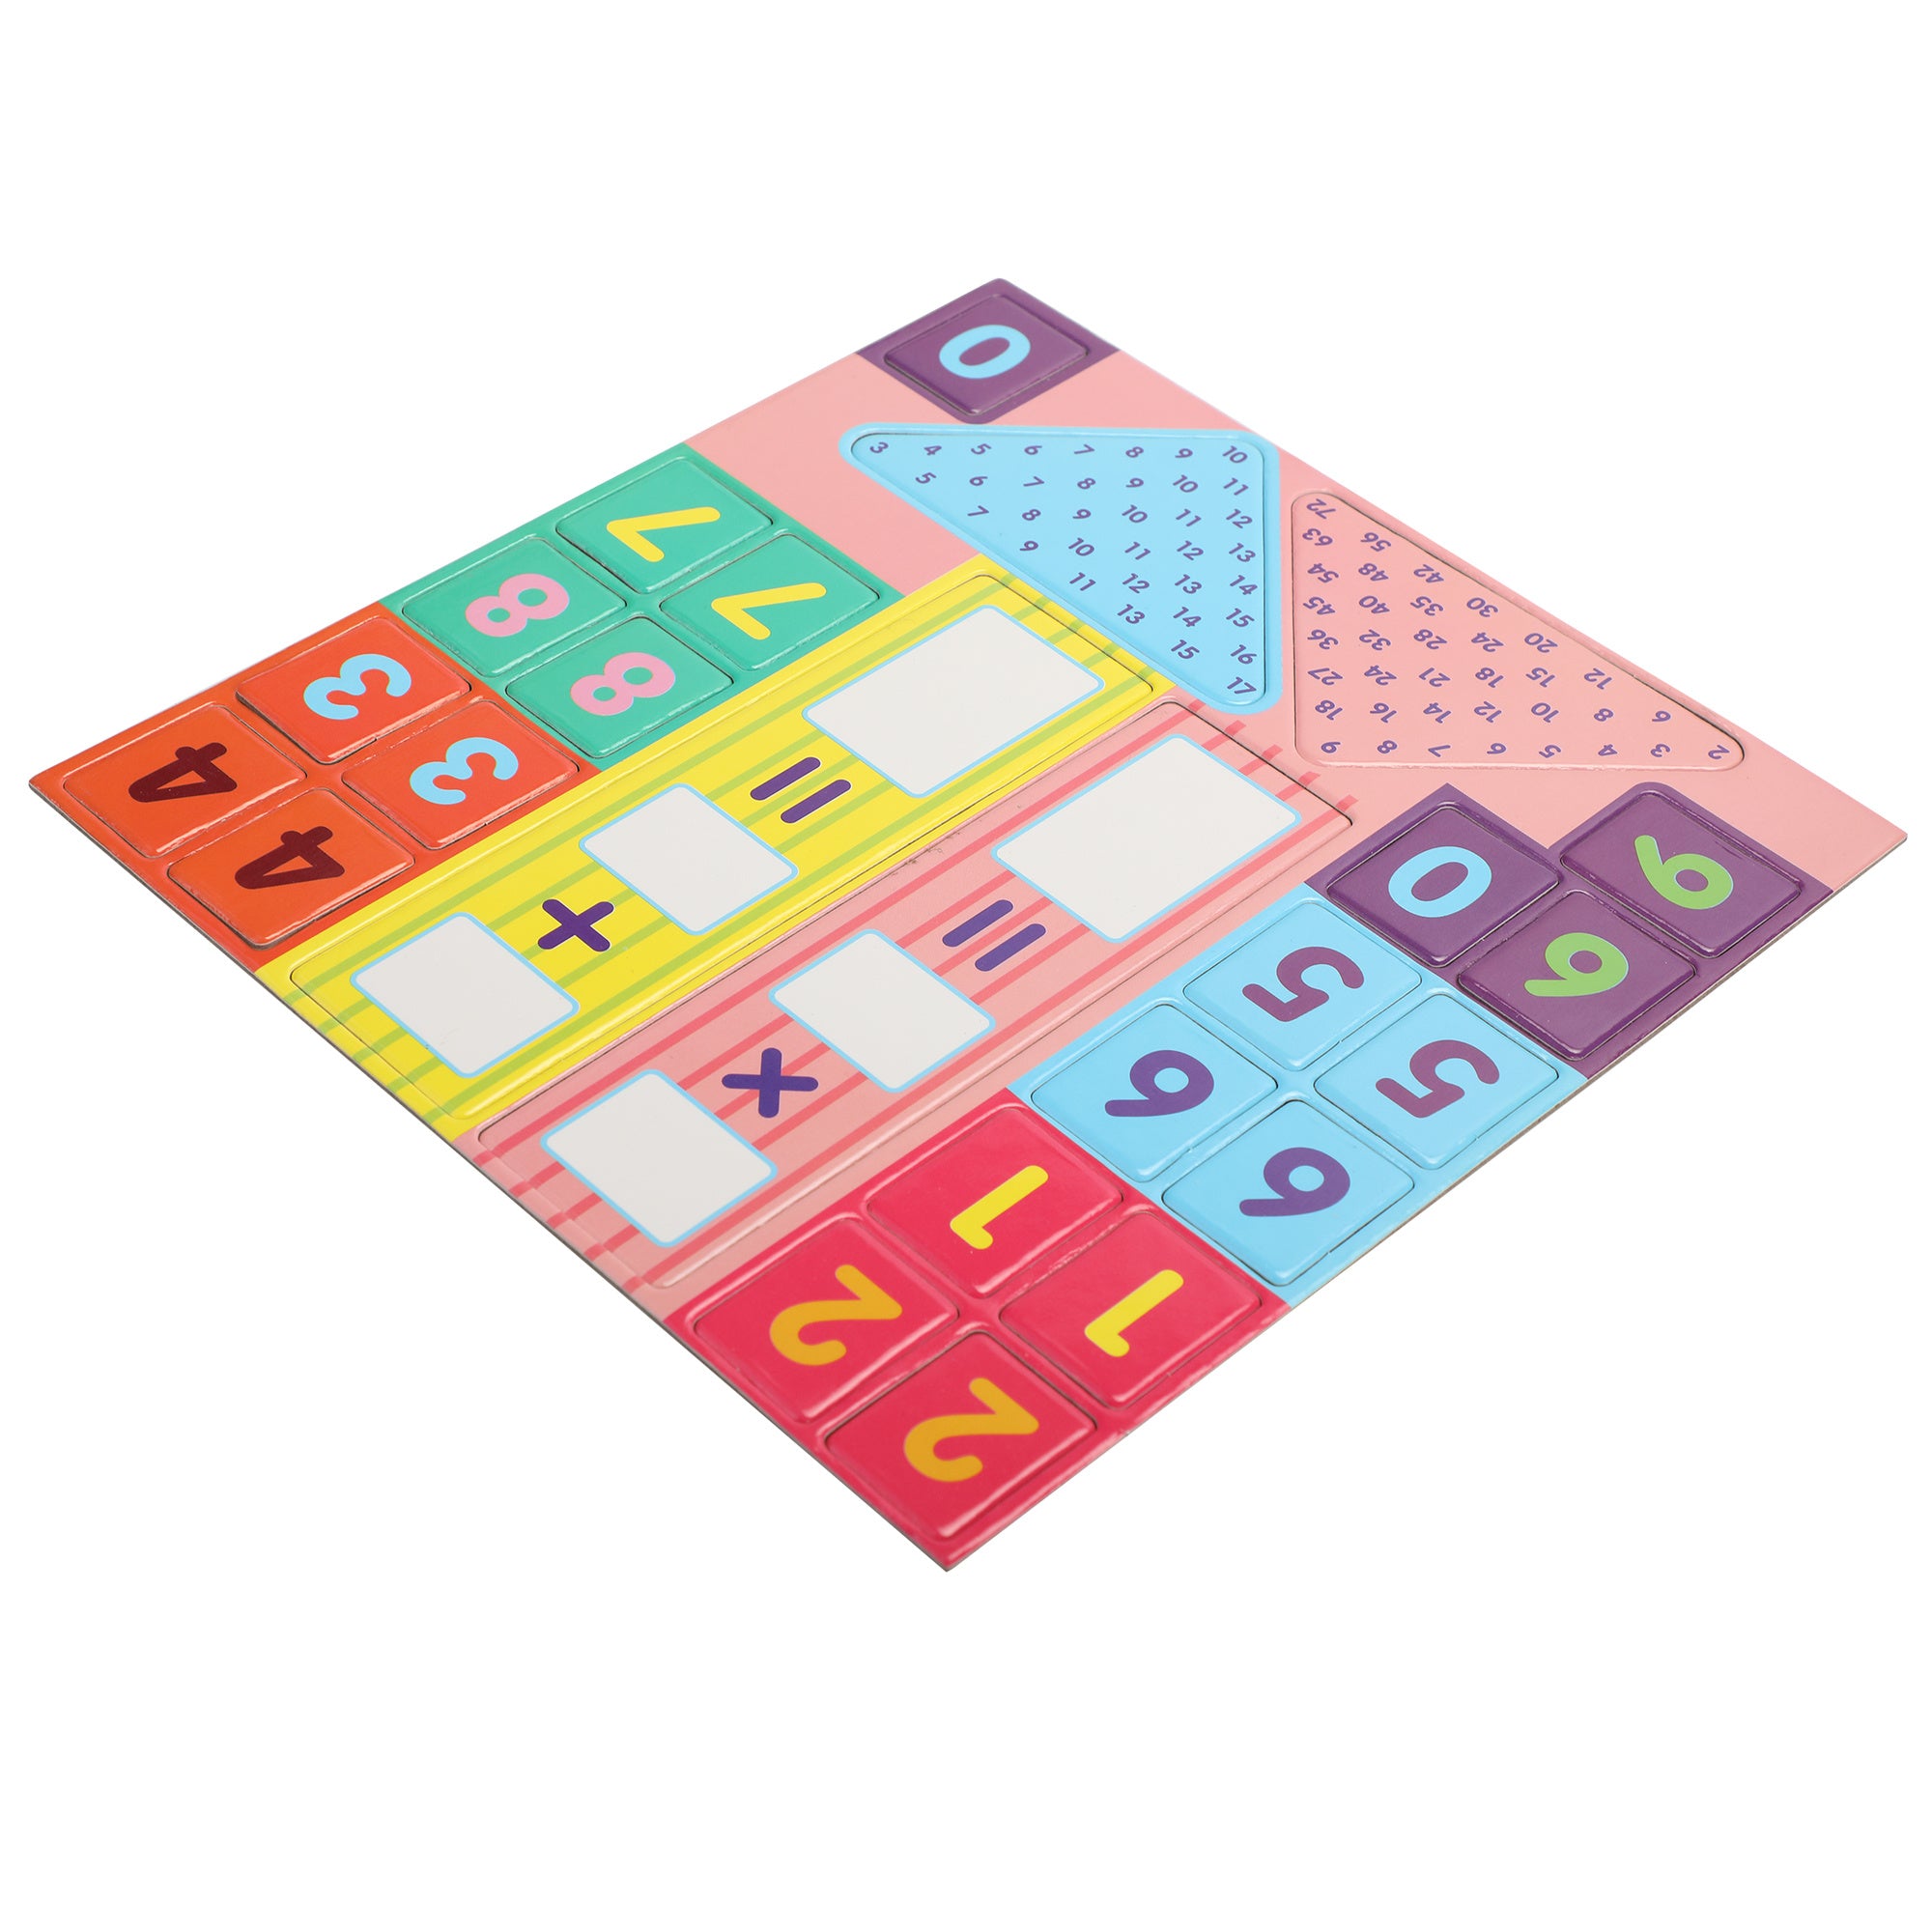 Children's Math Monkey Educational Toys for Toddles, Preschool Number Learning Fun Game for Boys & Girls, Monkey Counting Gift for kids XH set including a colorful Math Monkey calculator, cardboard worksheets, and number tiles spread out on a table for interactive learning.